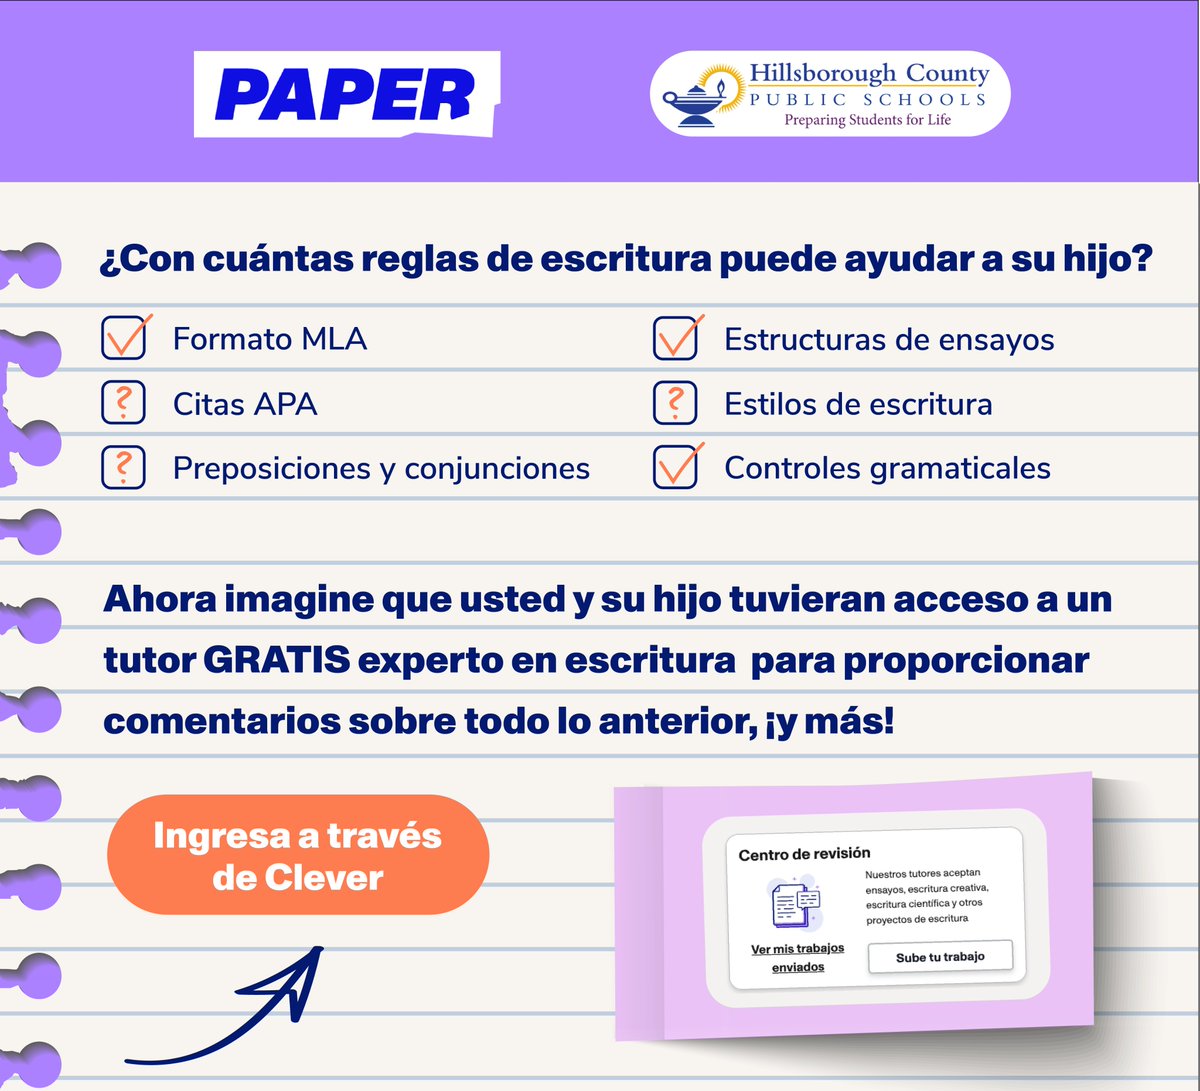 Want annotated feedback on written work from expert tutors? Paper's Review Center tutors can coach students on their written work! 📔🏫🧑‍🎓 @HCPSBoysPrep @hcps_espanol @HCPSCommunity @paperlearning